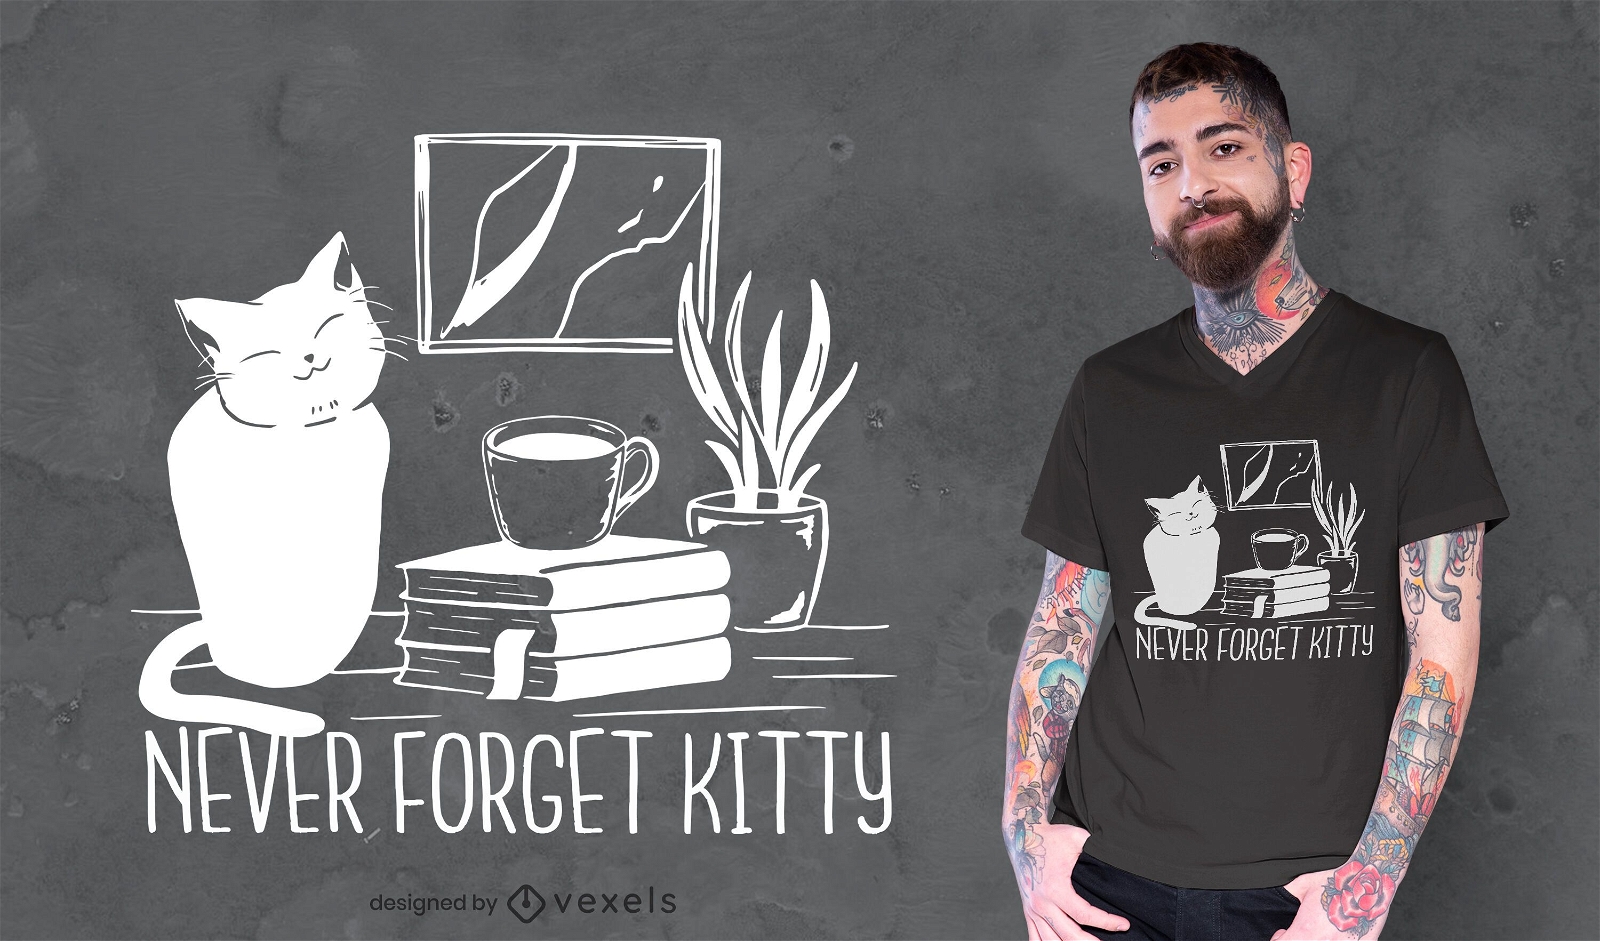 Never forget kitty t-shirt design